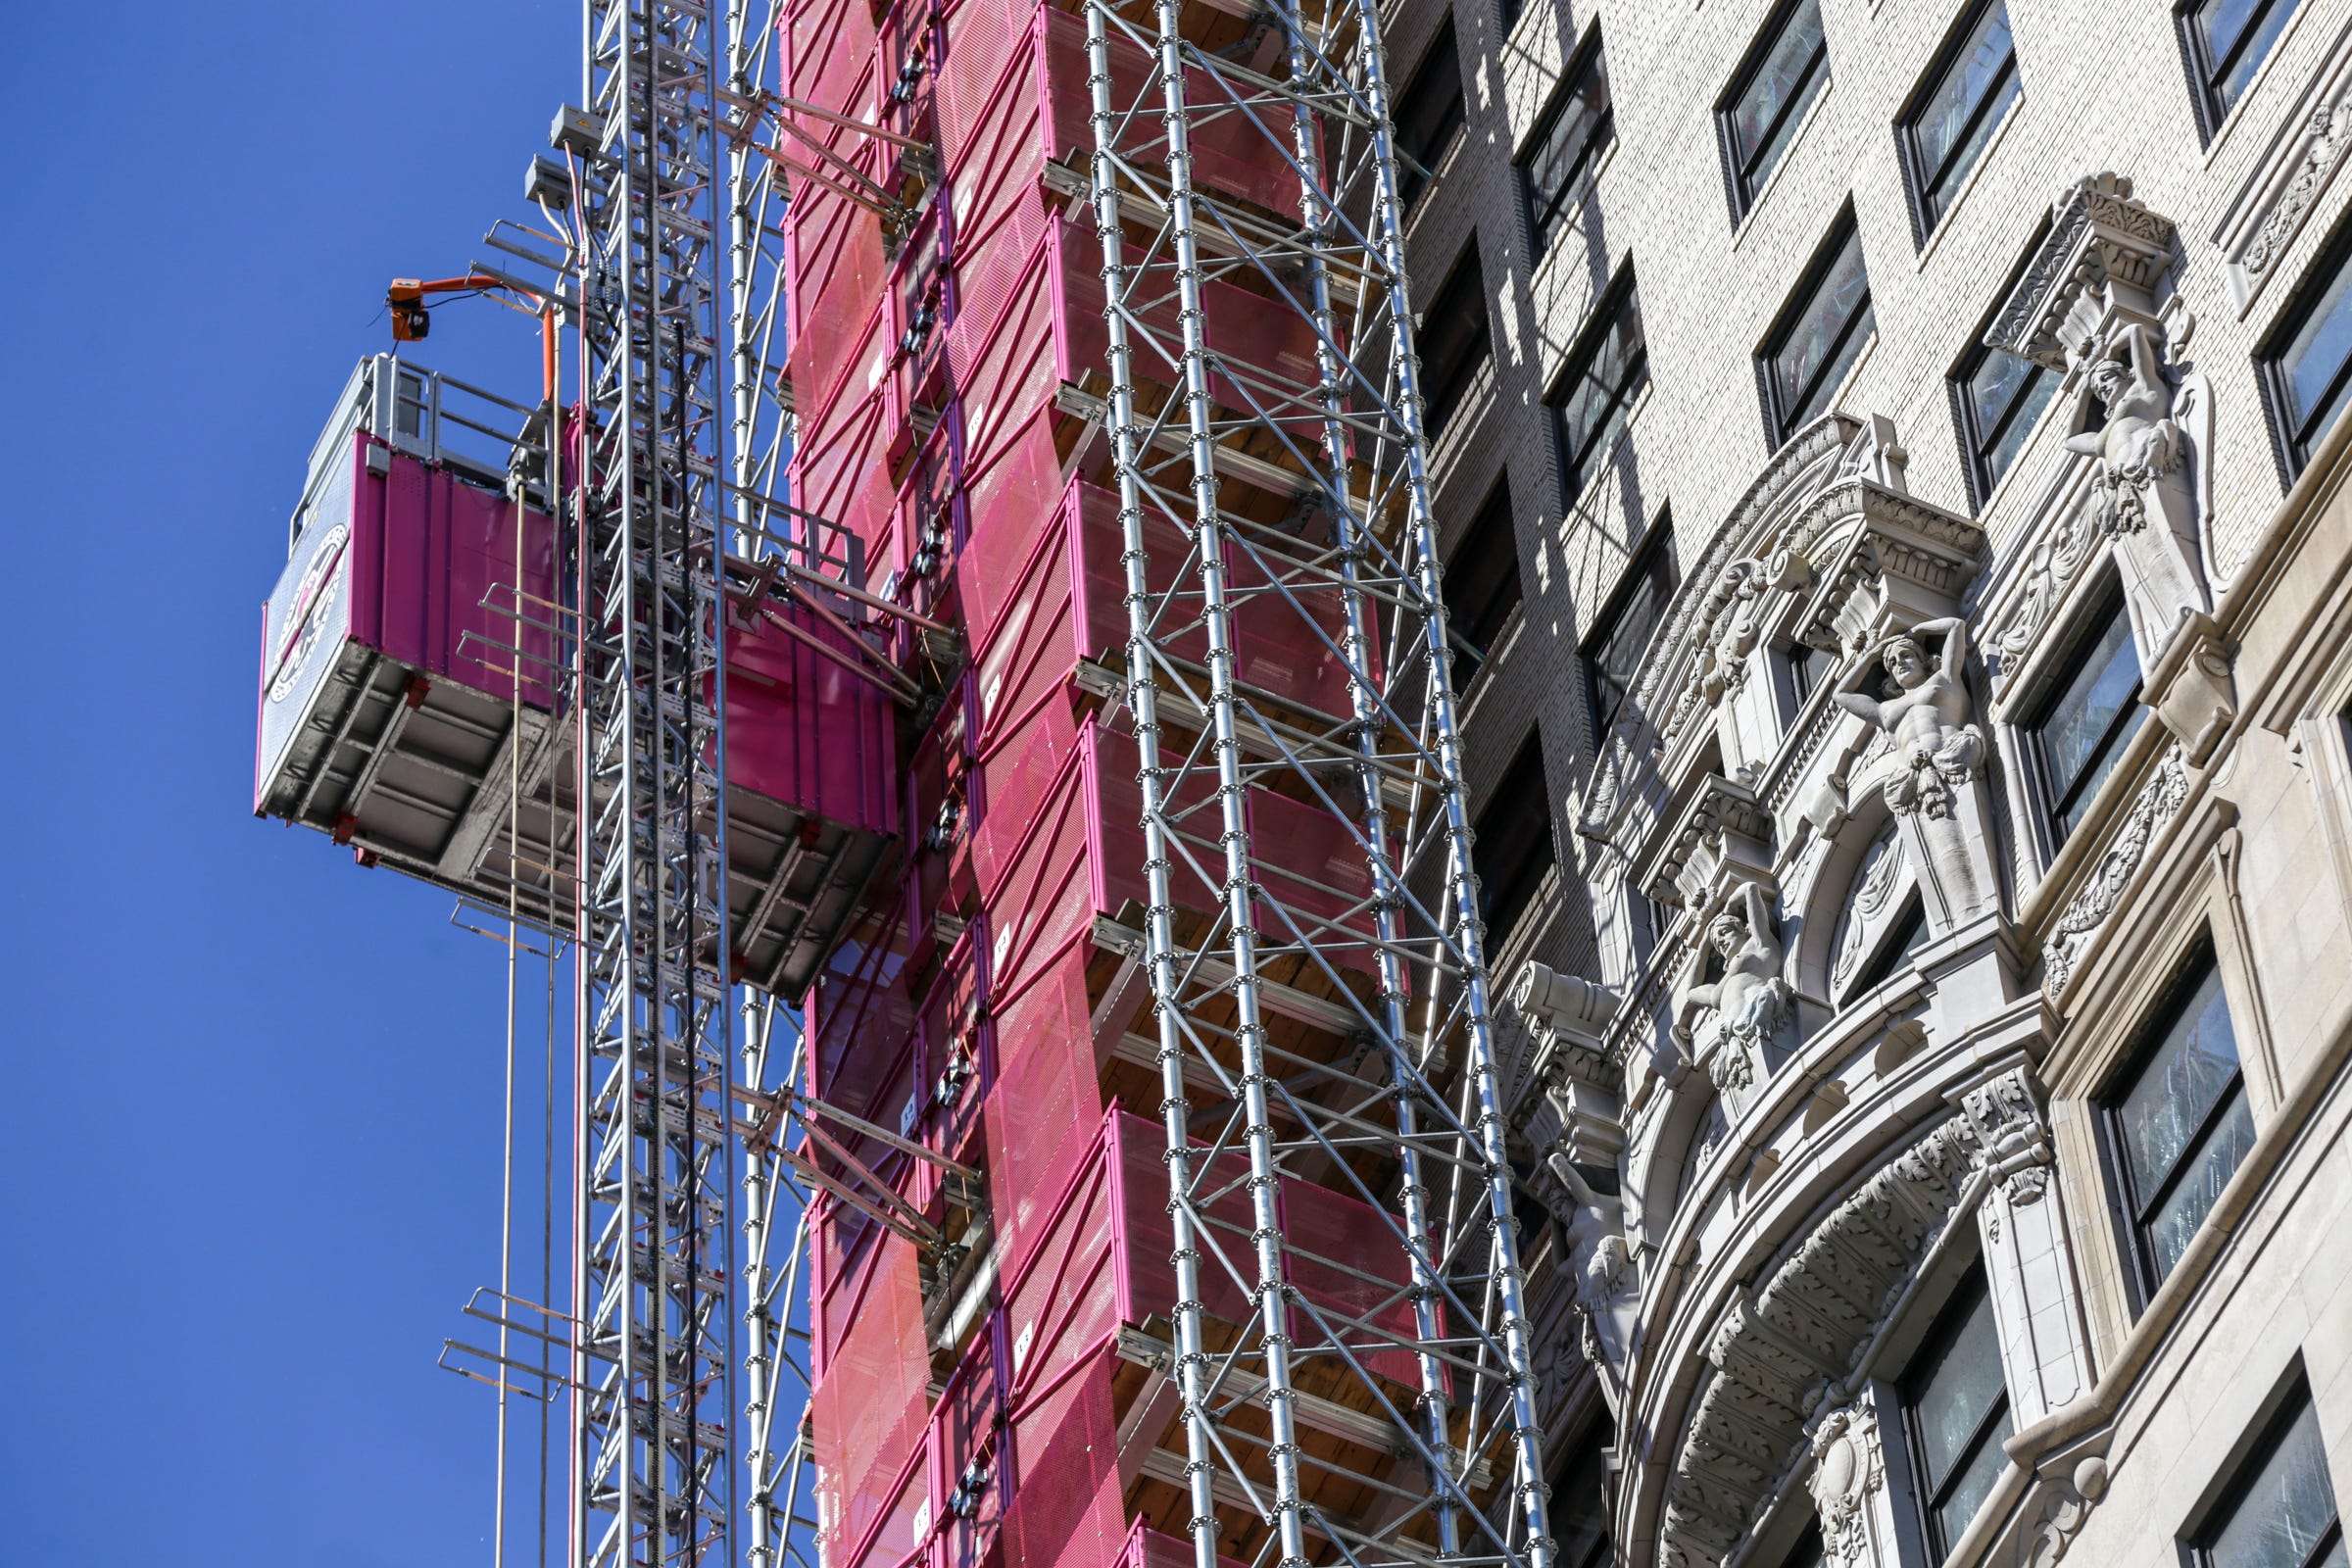 The historic Book Tower and Book building in downtown Detroit, undergoing rehabilitation by Bedrock on Tuesday, June 11, 2019.